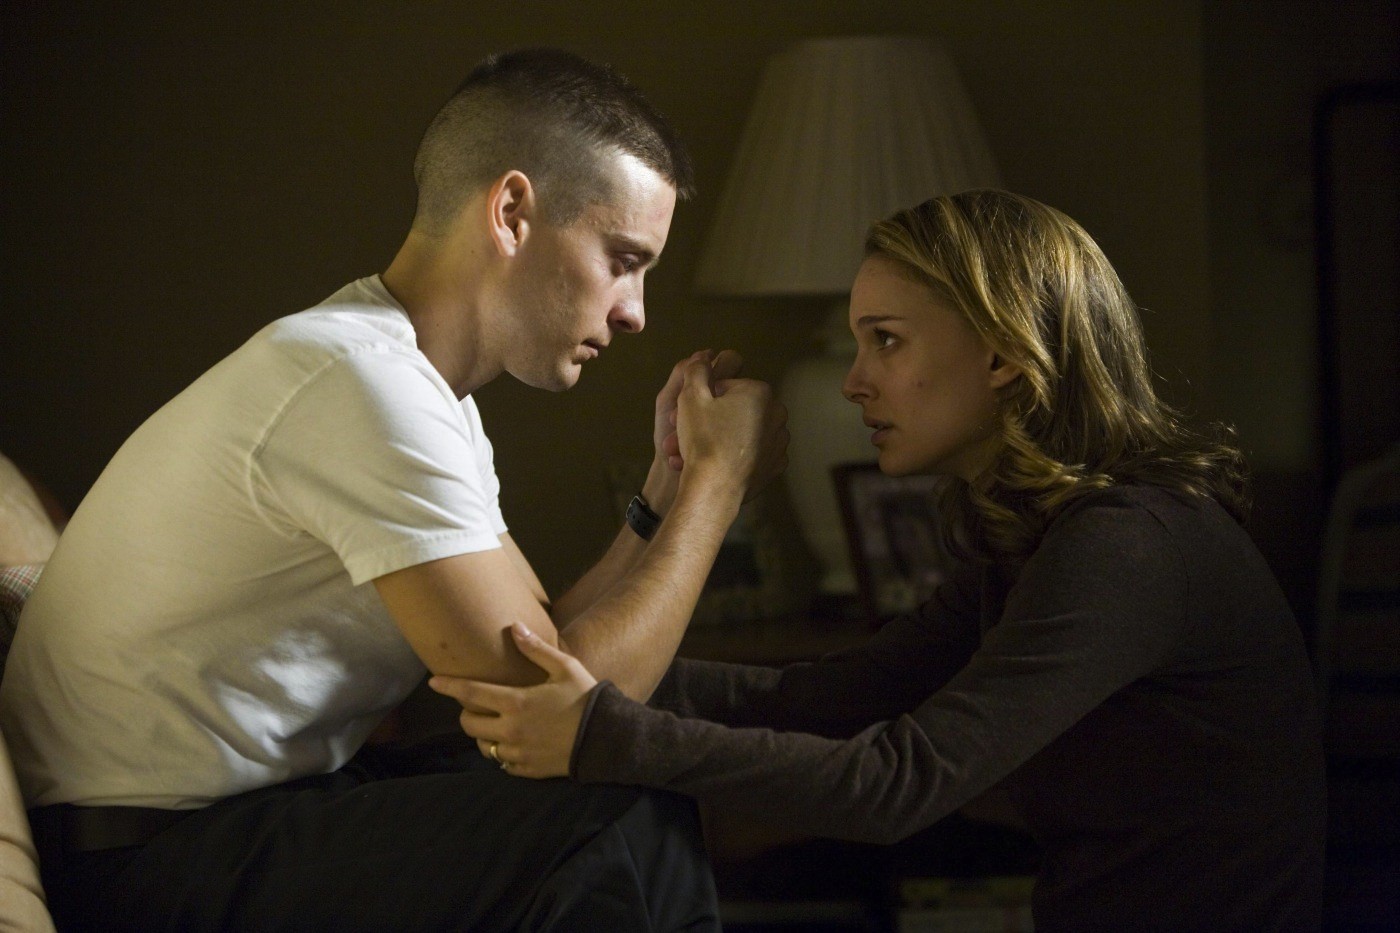 Tobey Maguire and Natalie Portman in a still from Brothers